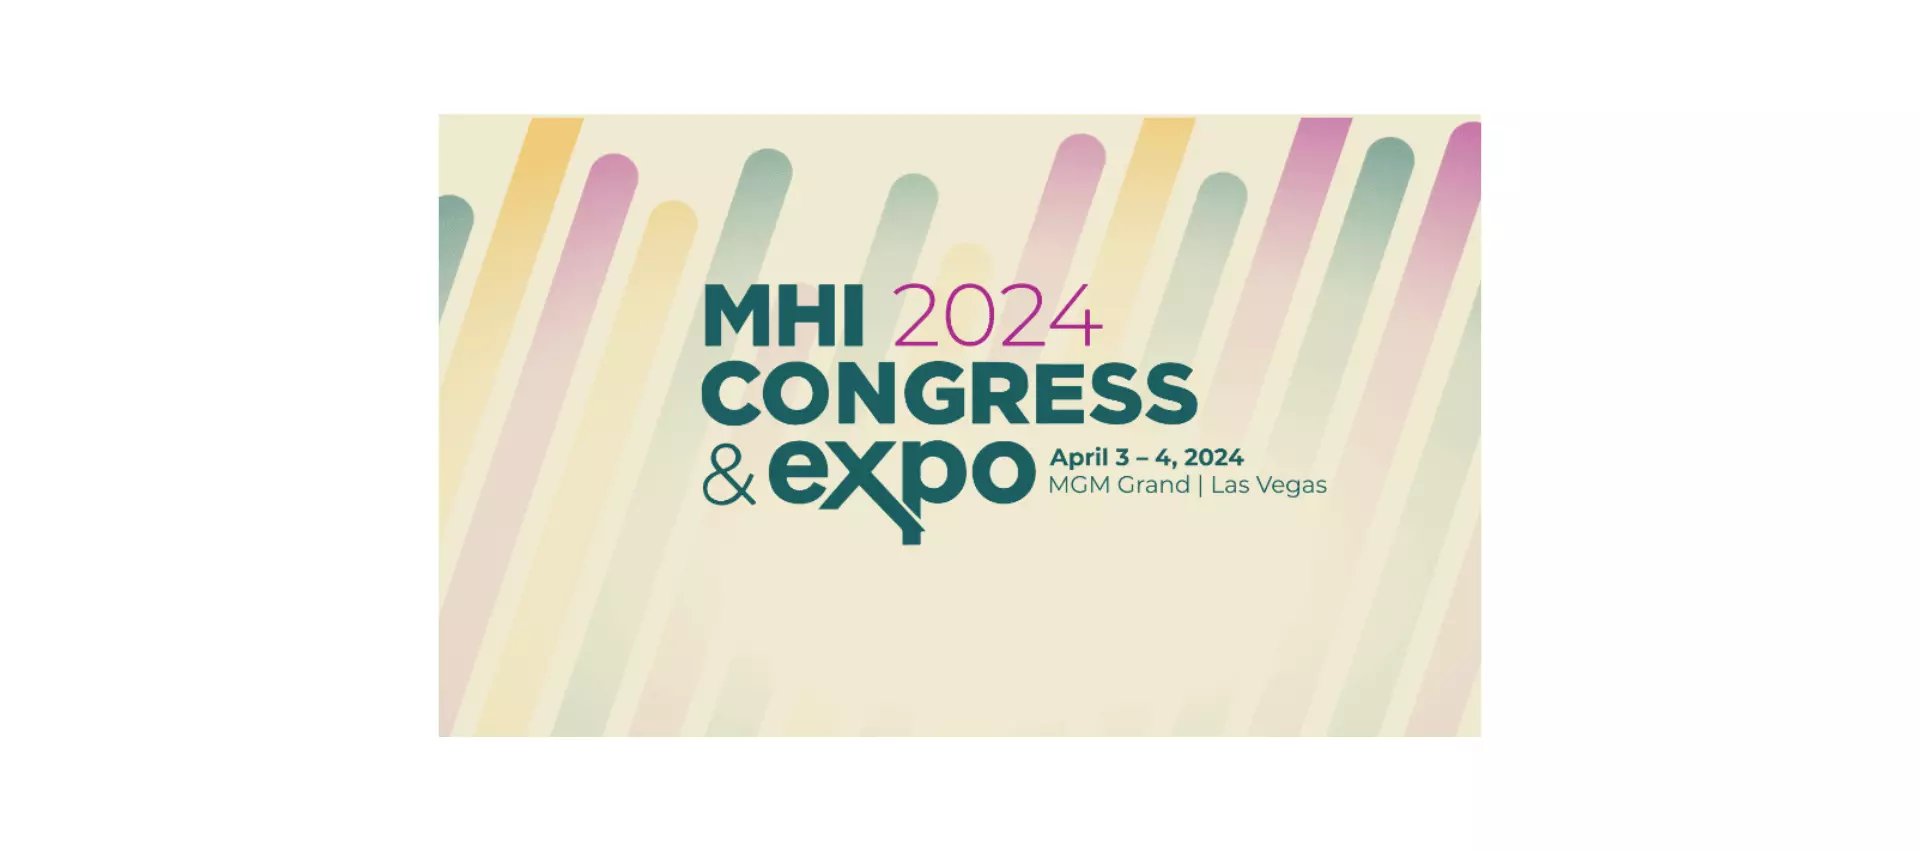 foremsot modular building will attend MHI Congressand Expo 2024 in Las Vegas